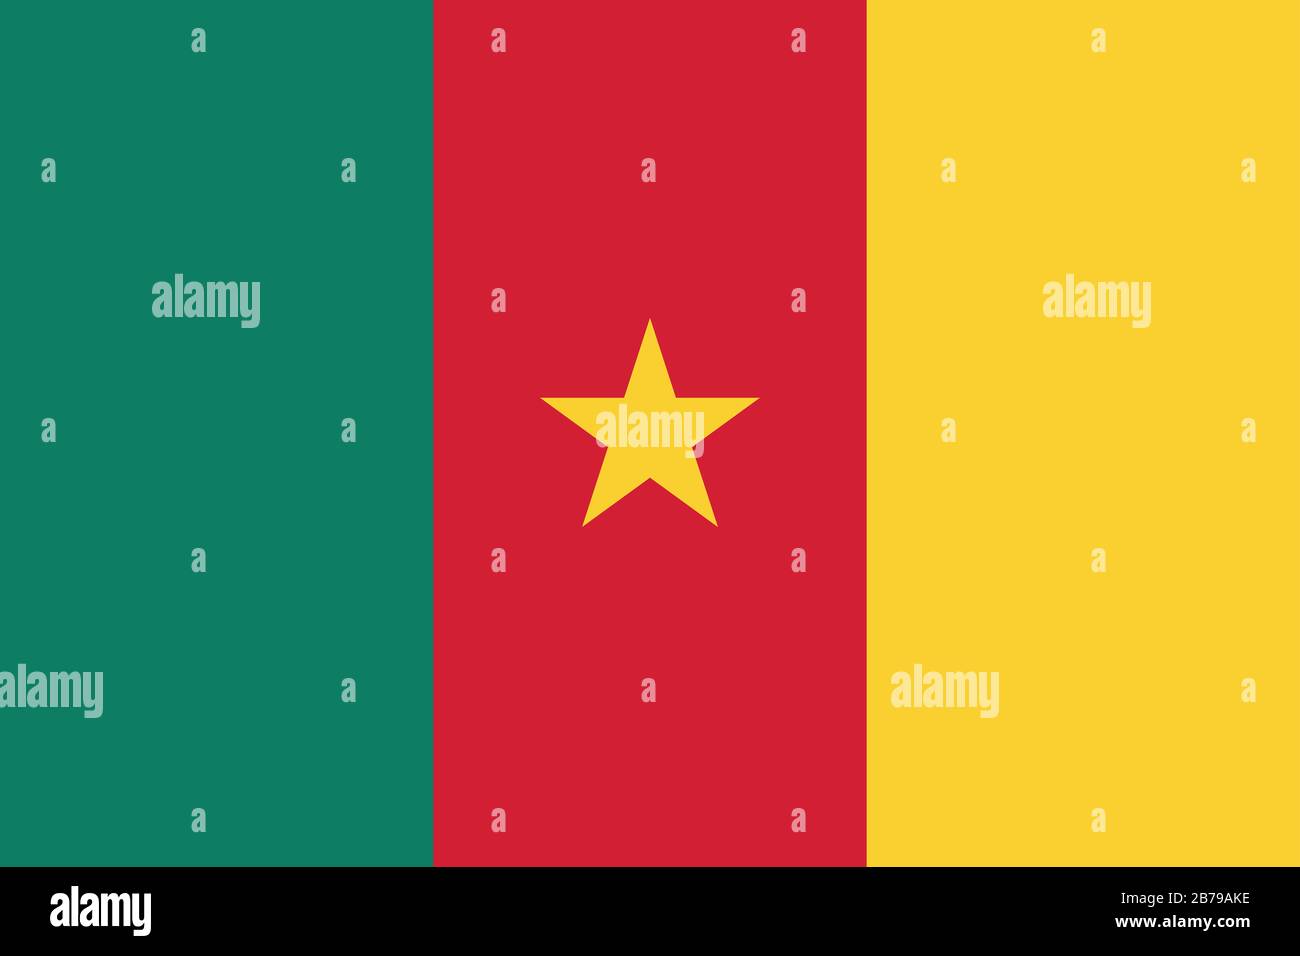 Flag of Cameroon - Cameroonian flag standard ratio - true RGB color mode Stock Photo